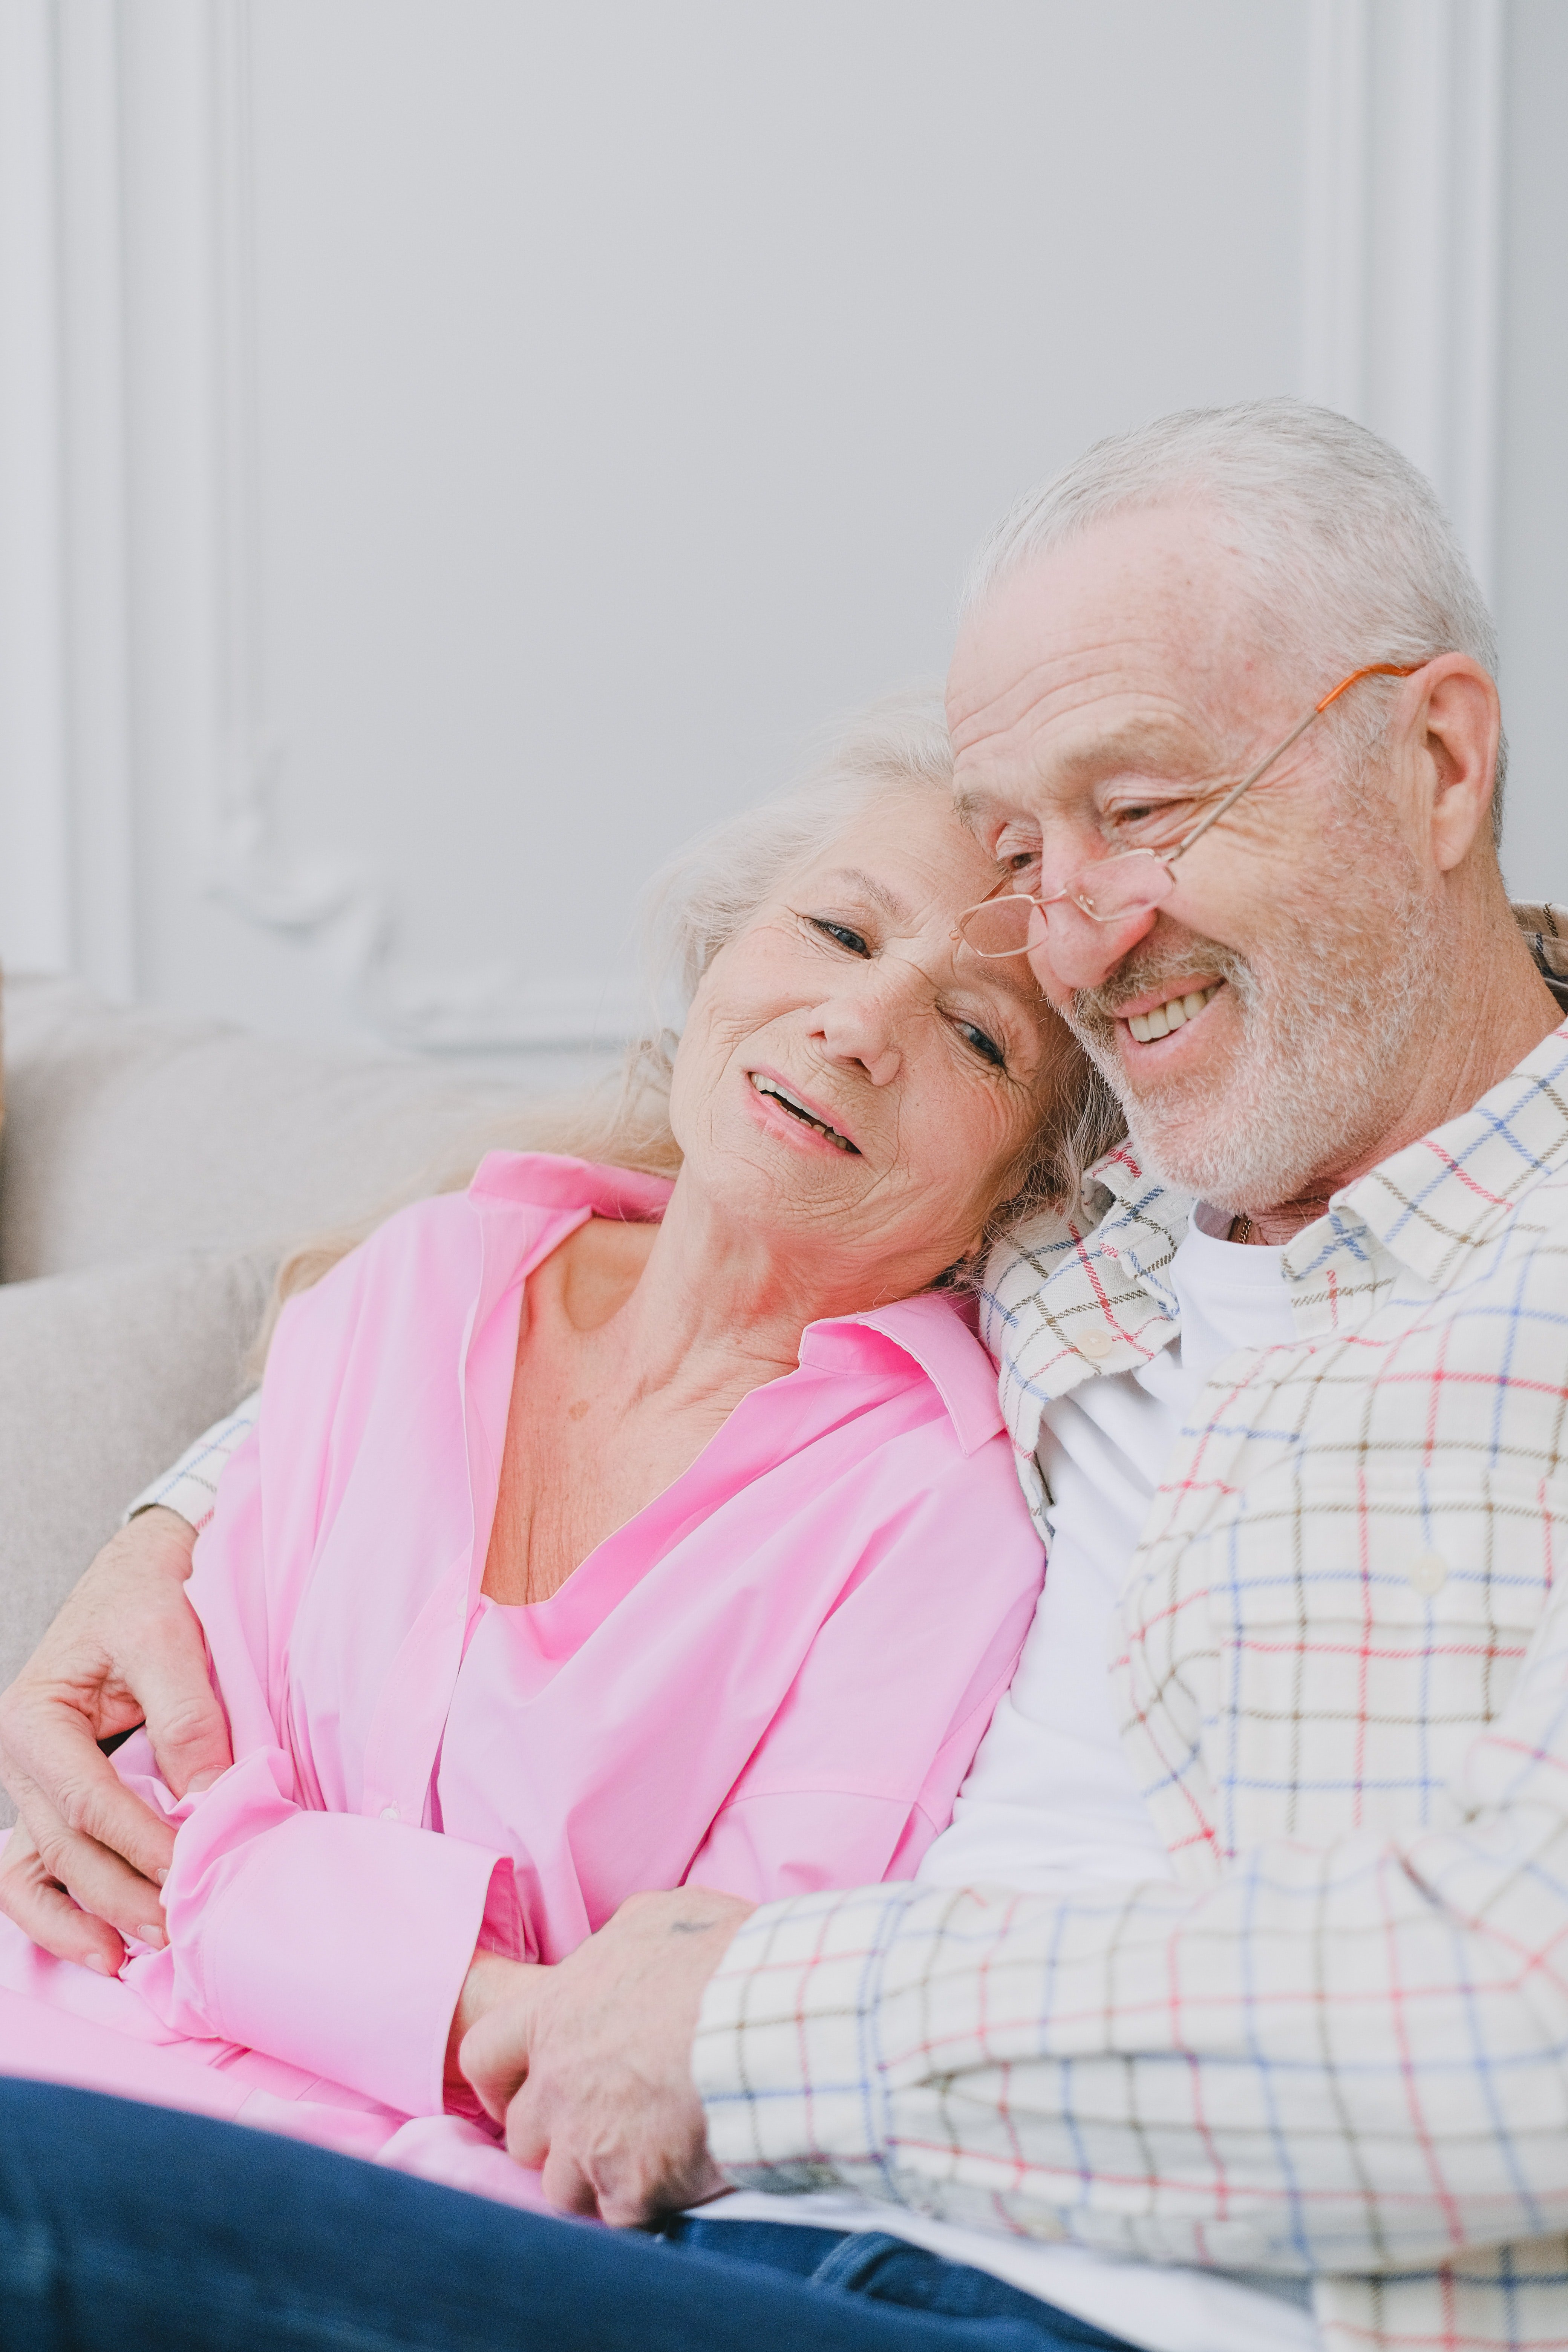 An Elderly Couple Smiling. | Source: Pexels